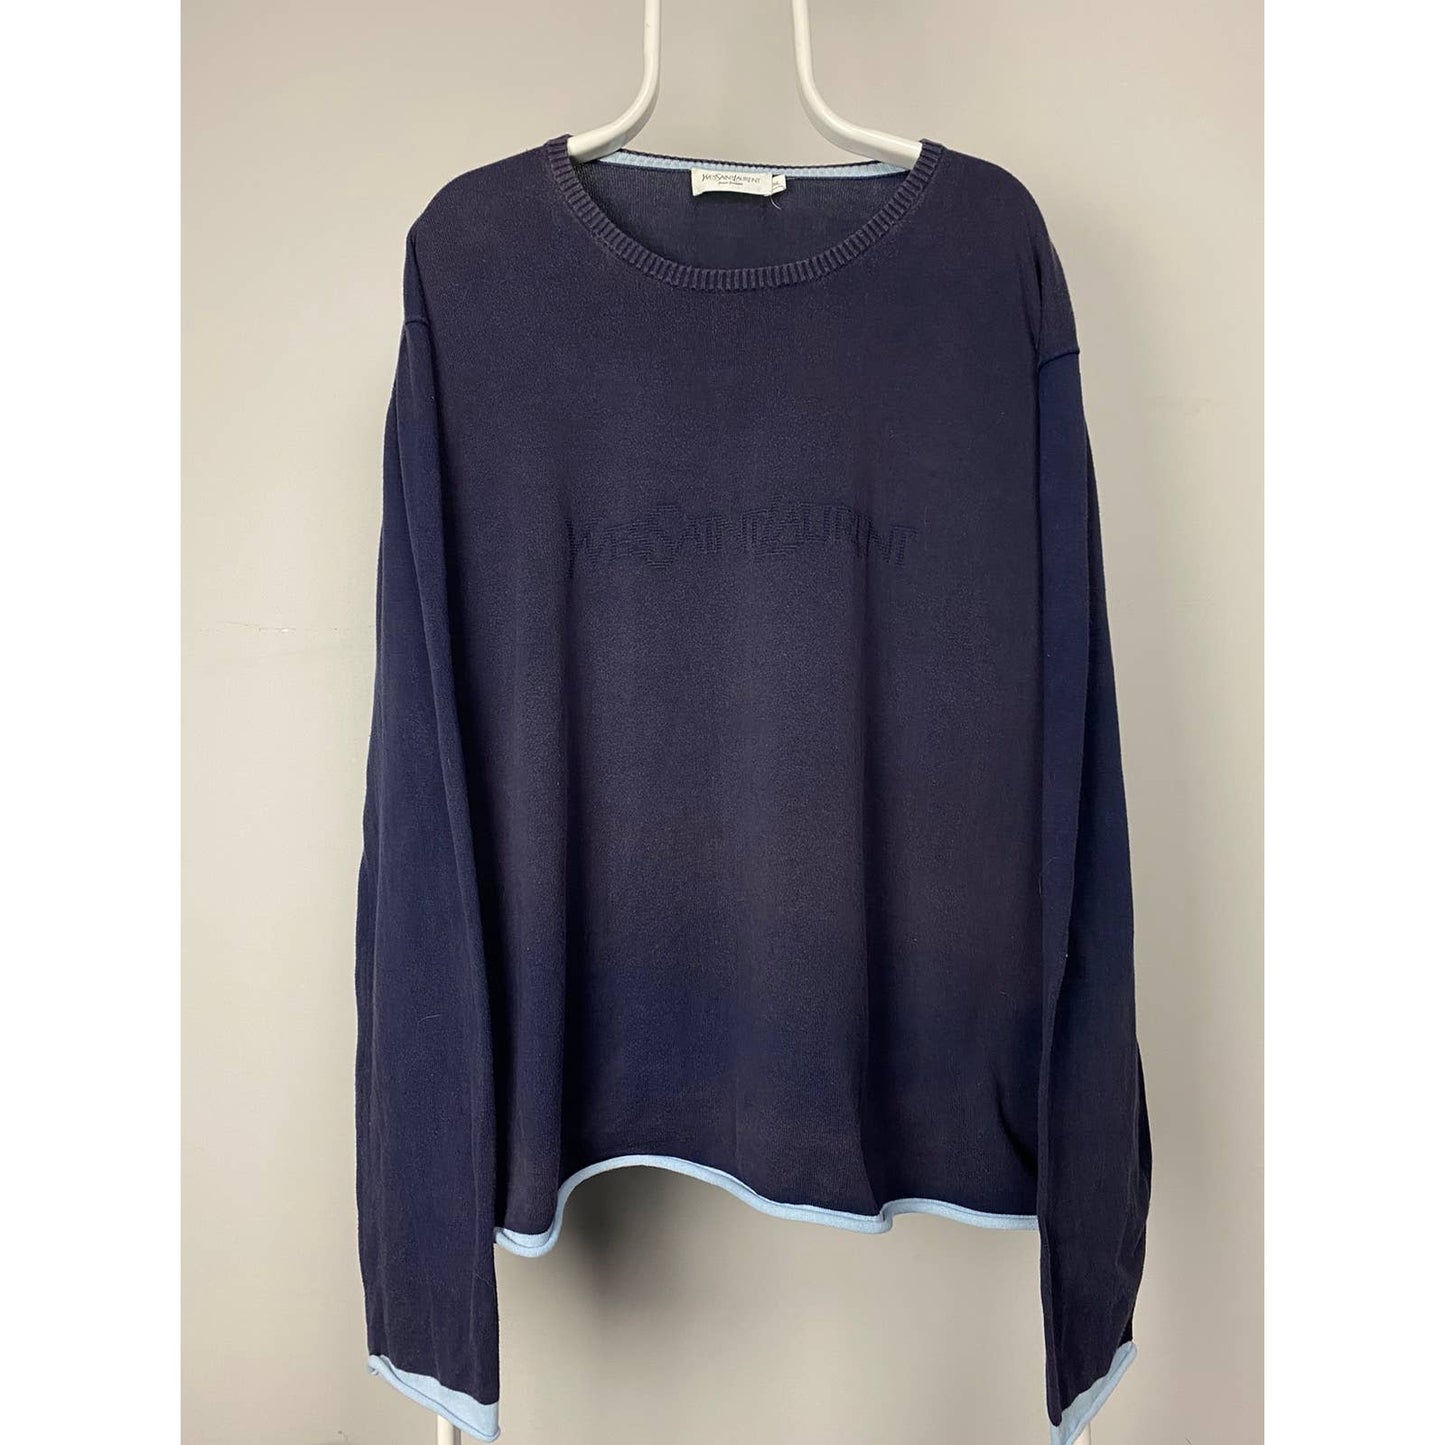 Yves Saint Laurent Vintage spell out sweater YSL knit